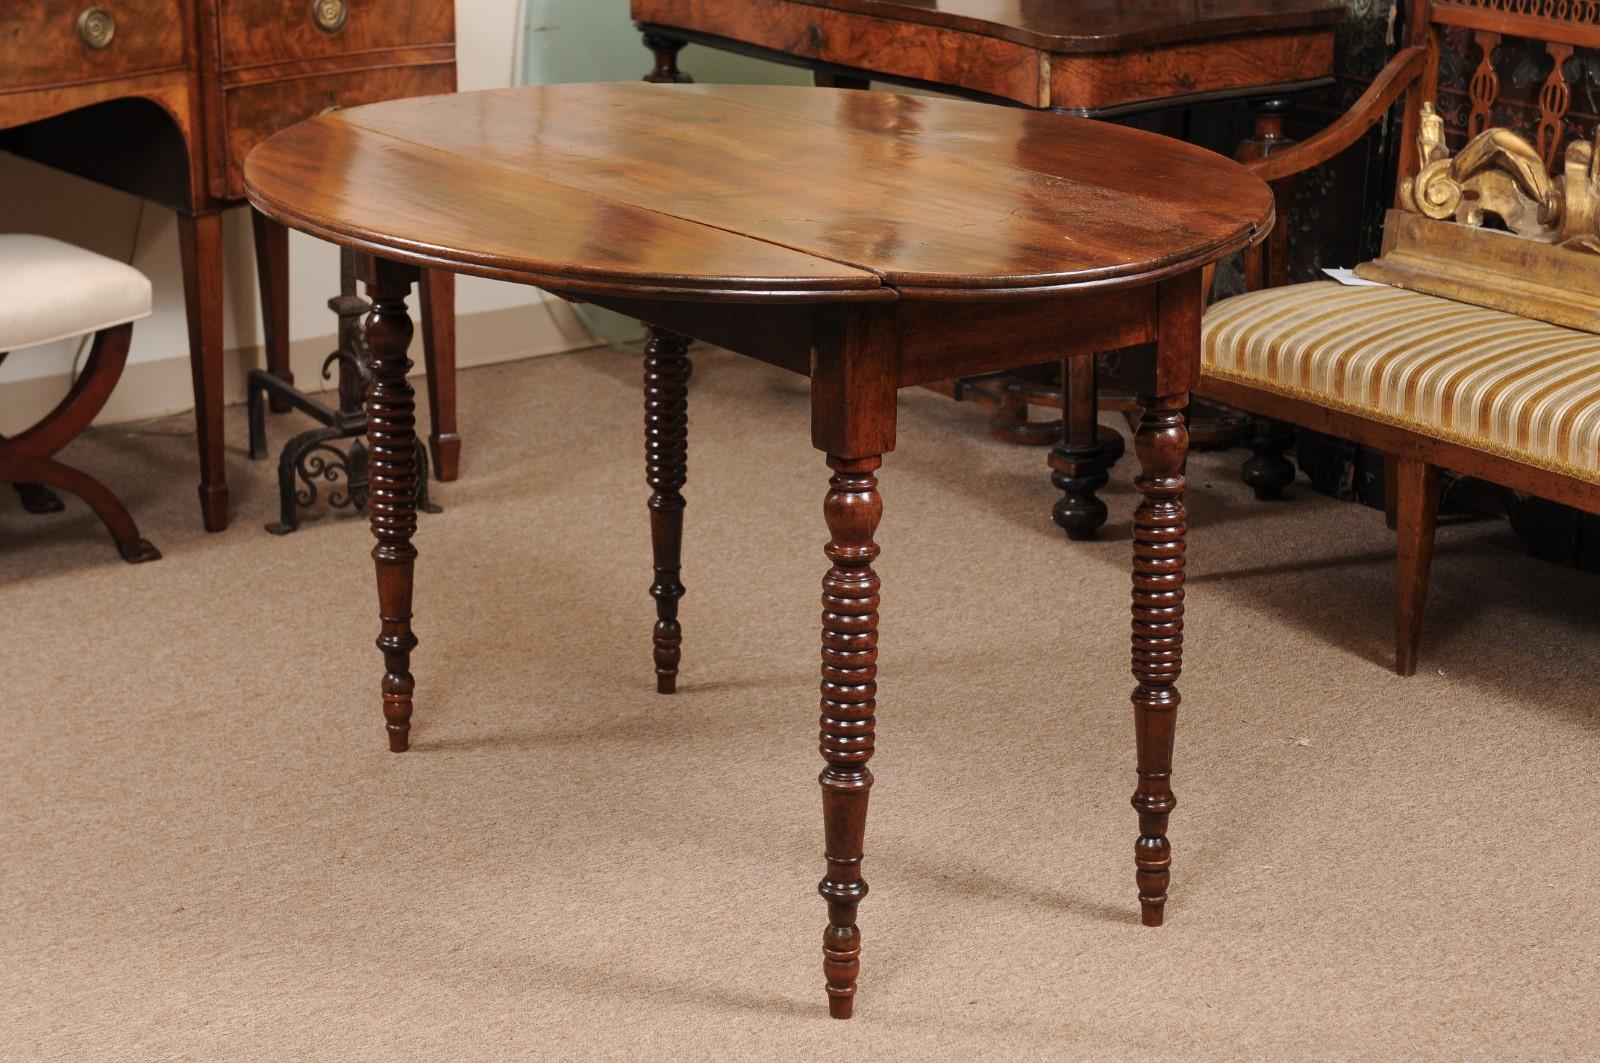 The mid-19th century mahogany breakfast table with oval top, drop leaves and bobbin turned legs. 

The dimensions are 51